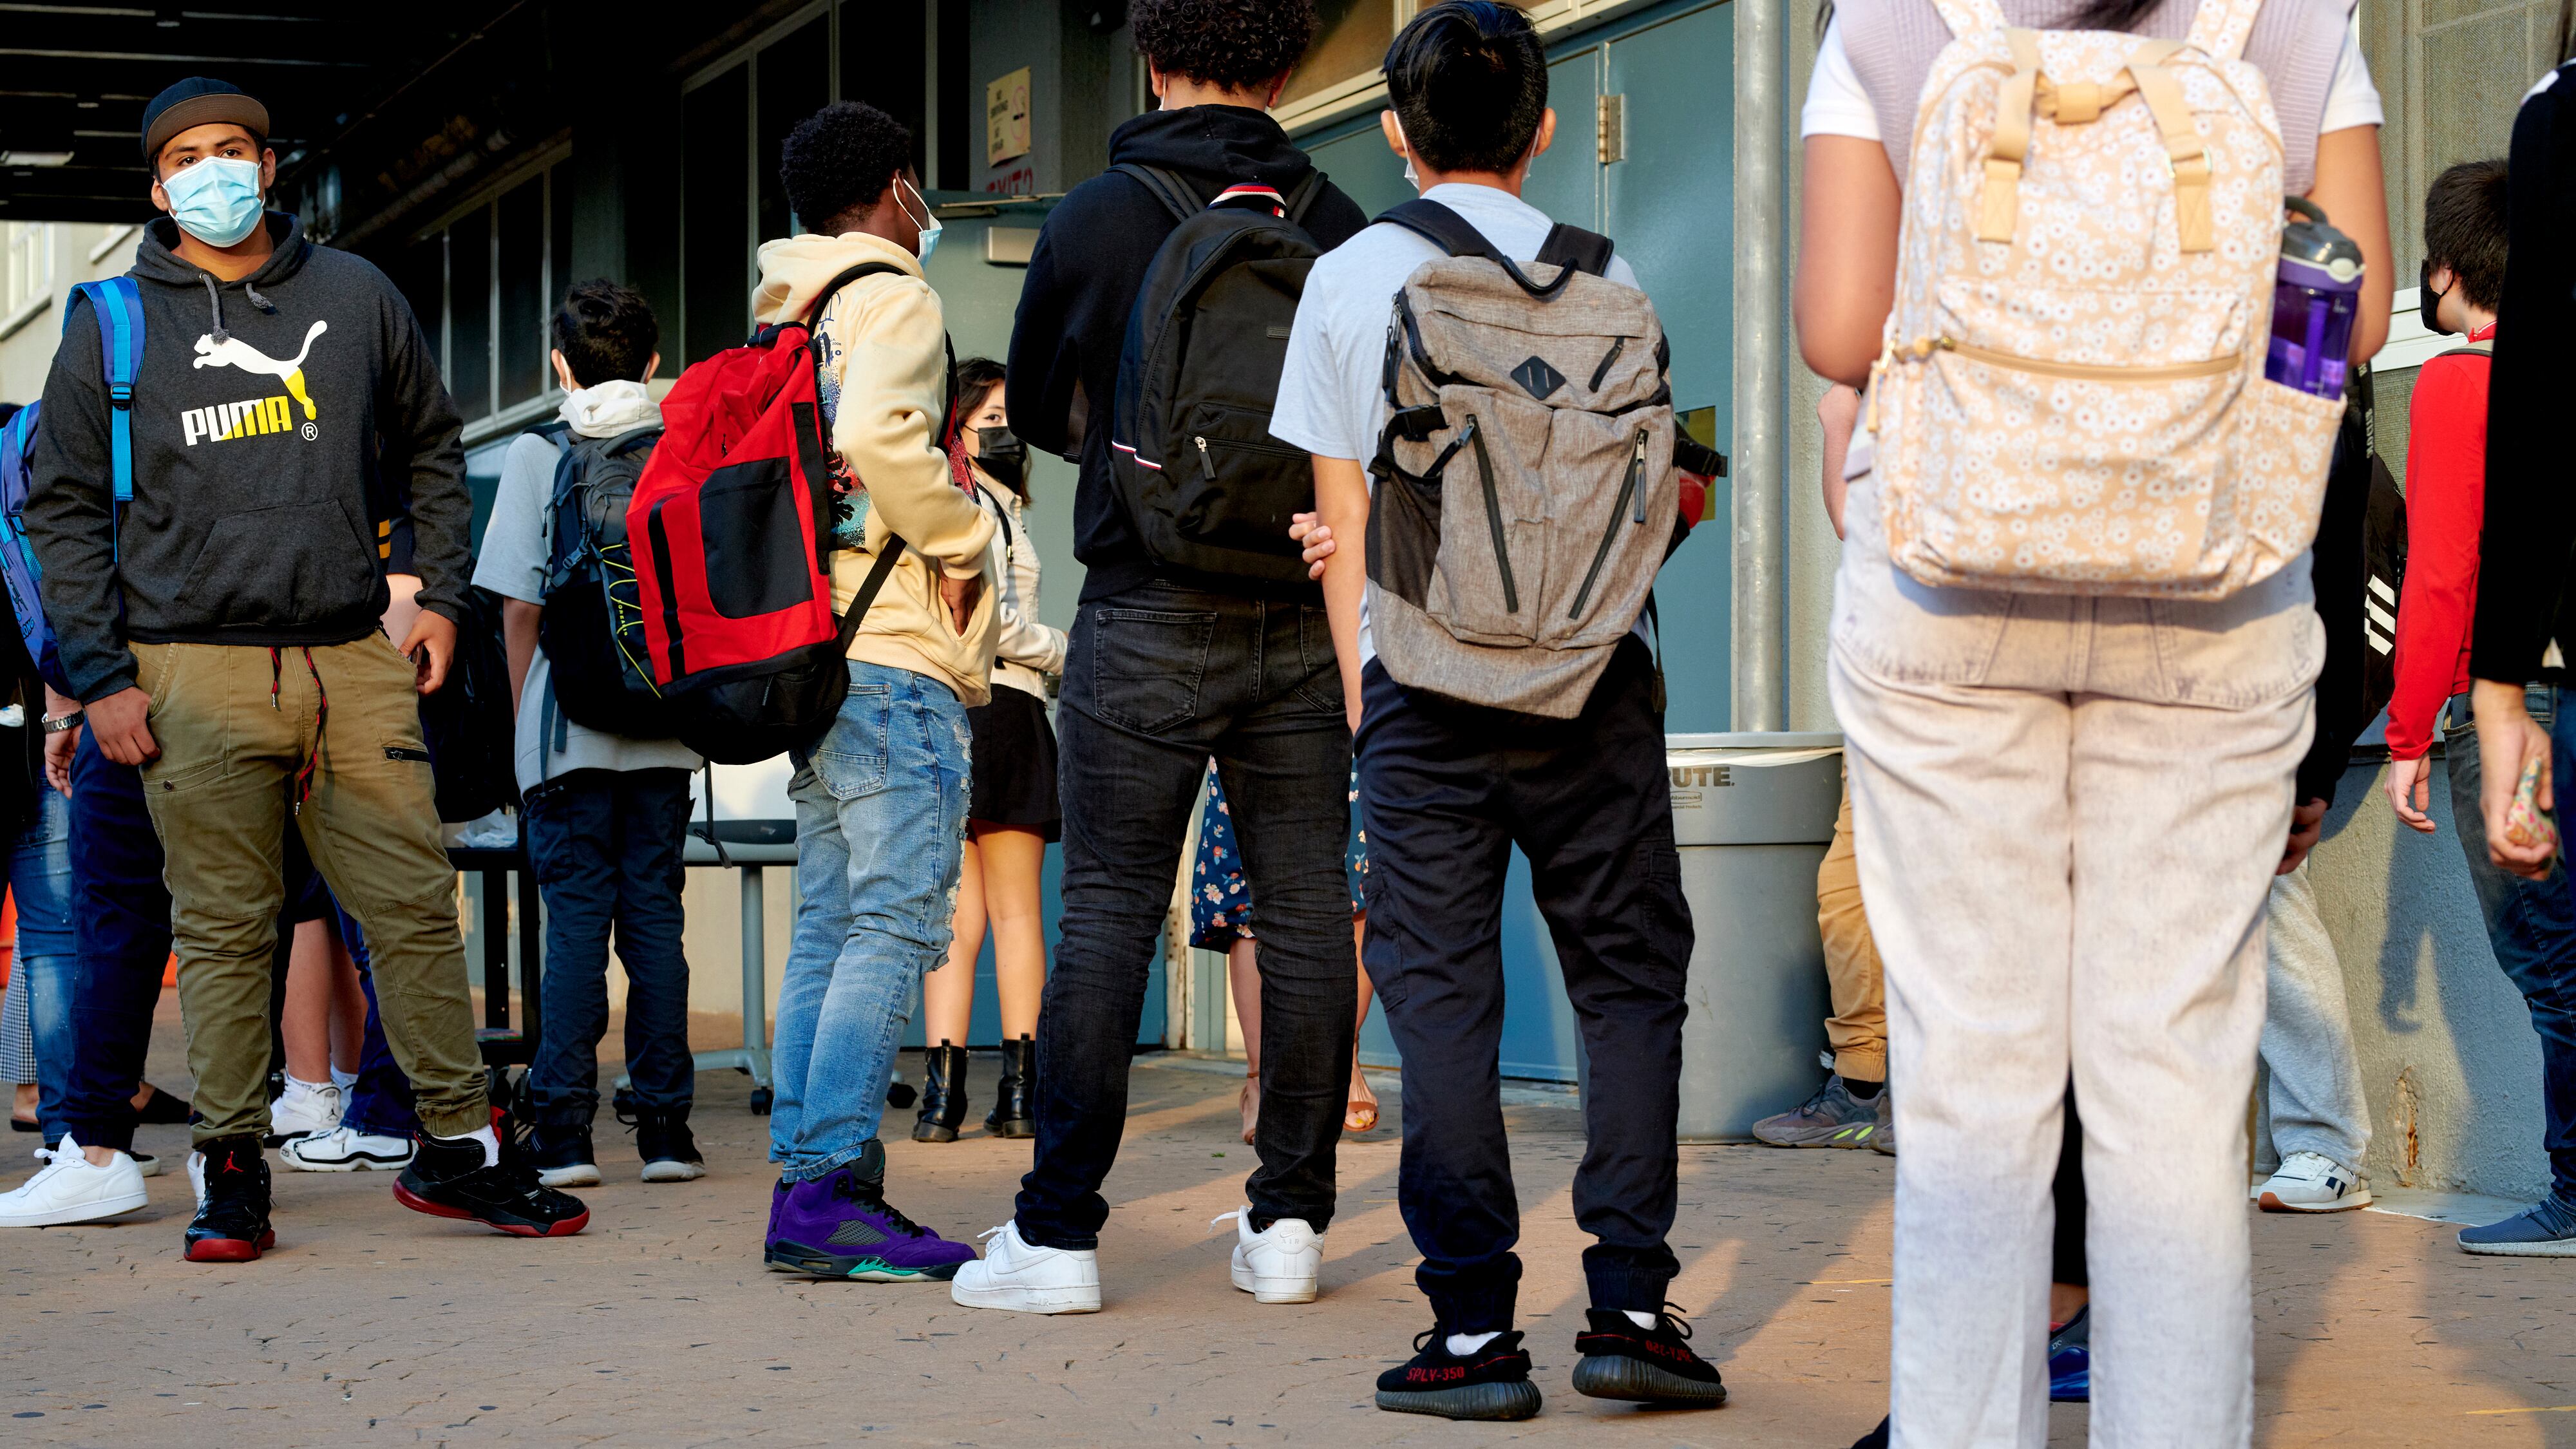 Students, wearing masks and backpacks, wait in line outside a school. Most are visible from the back only.